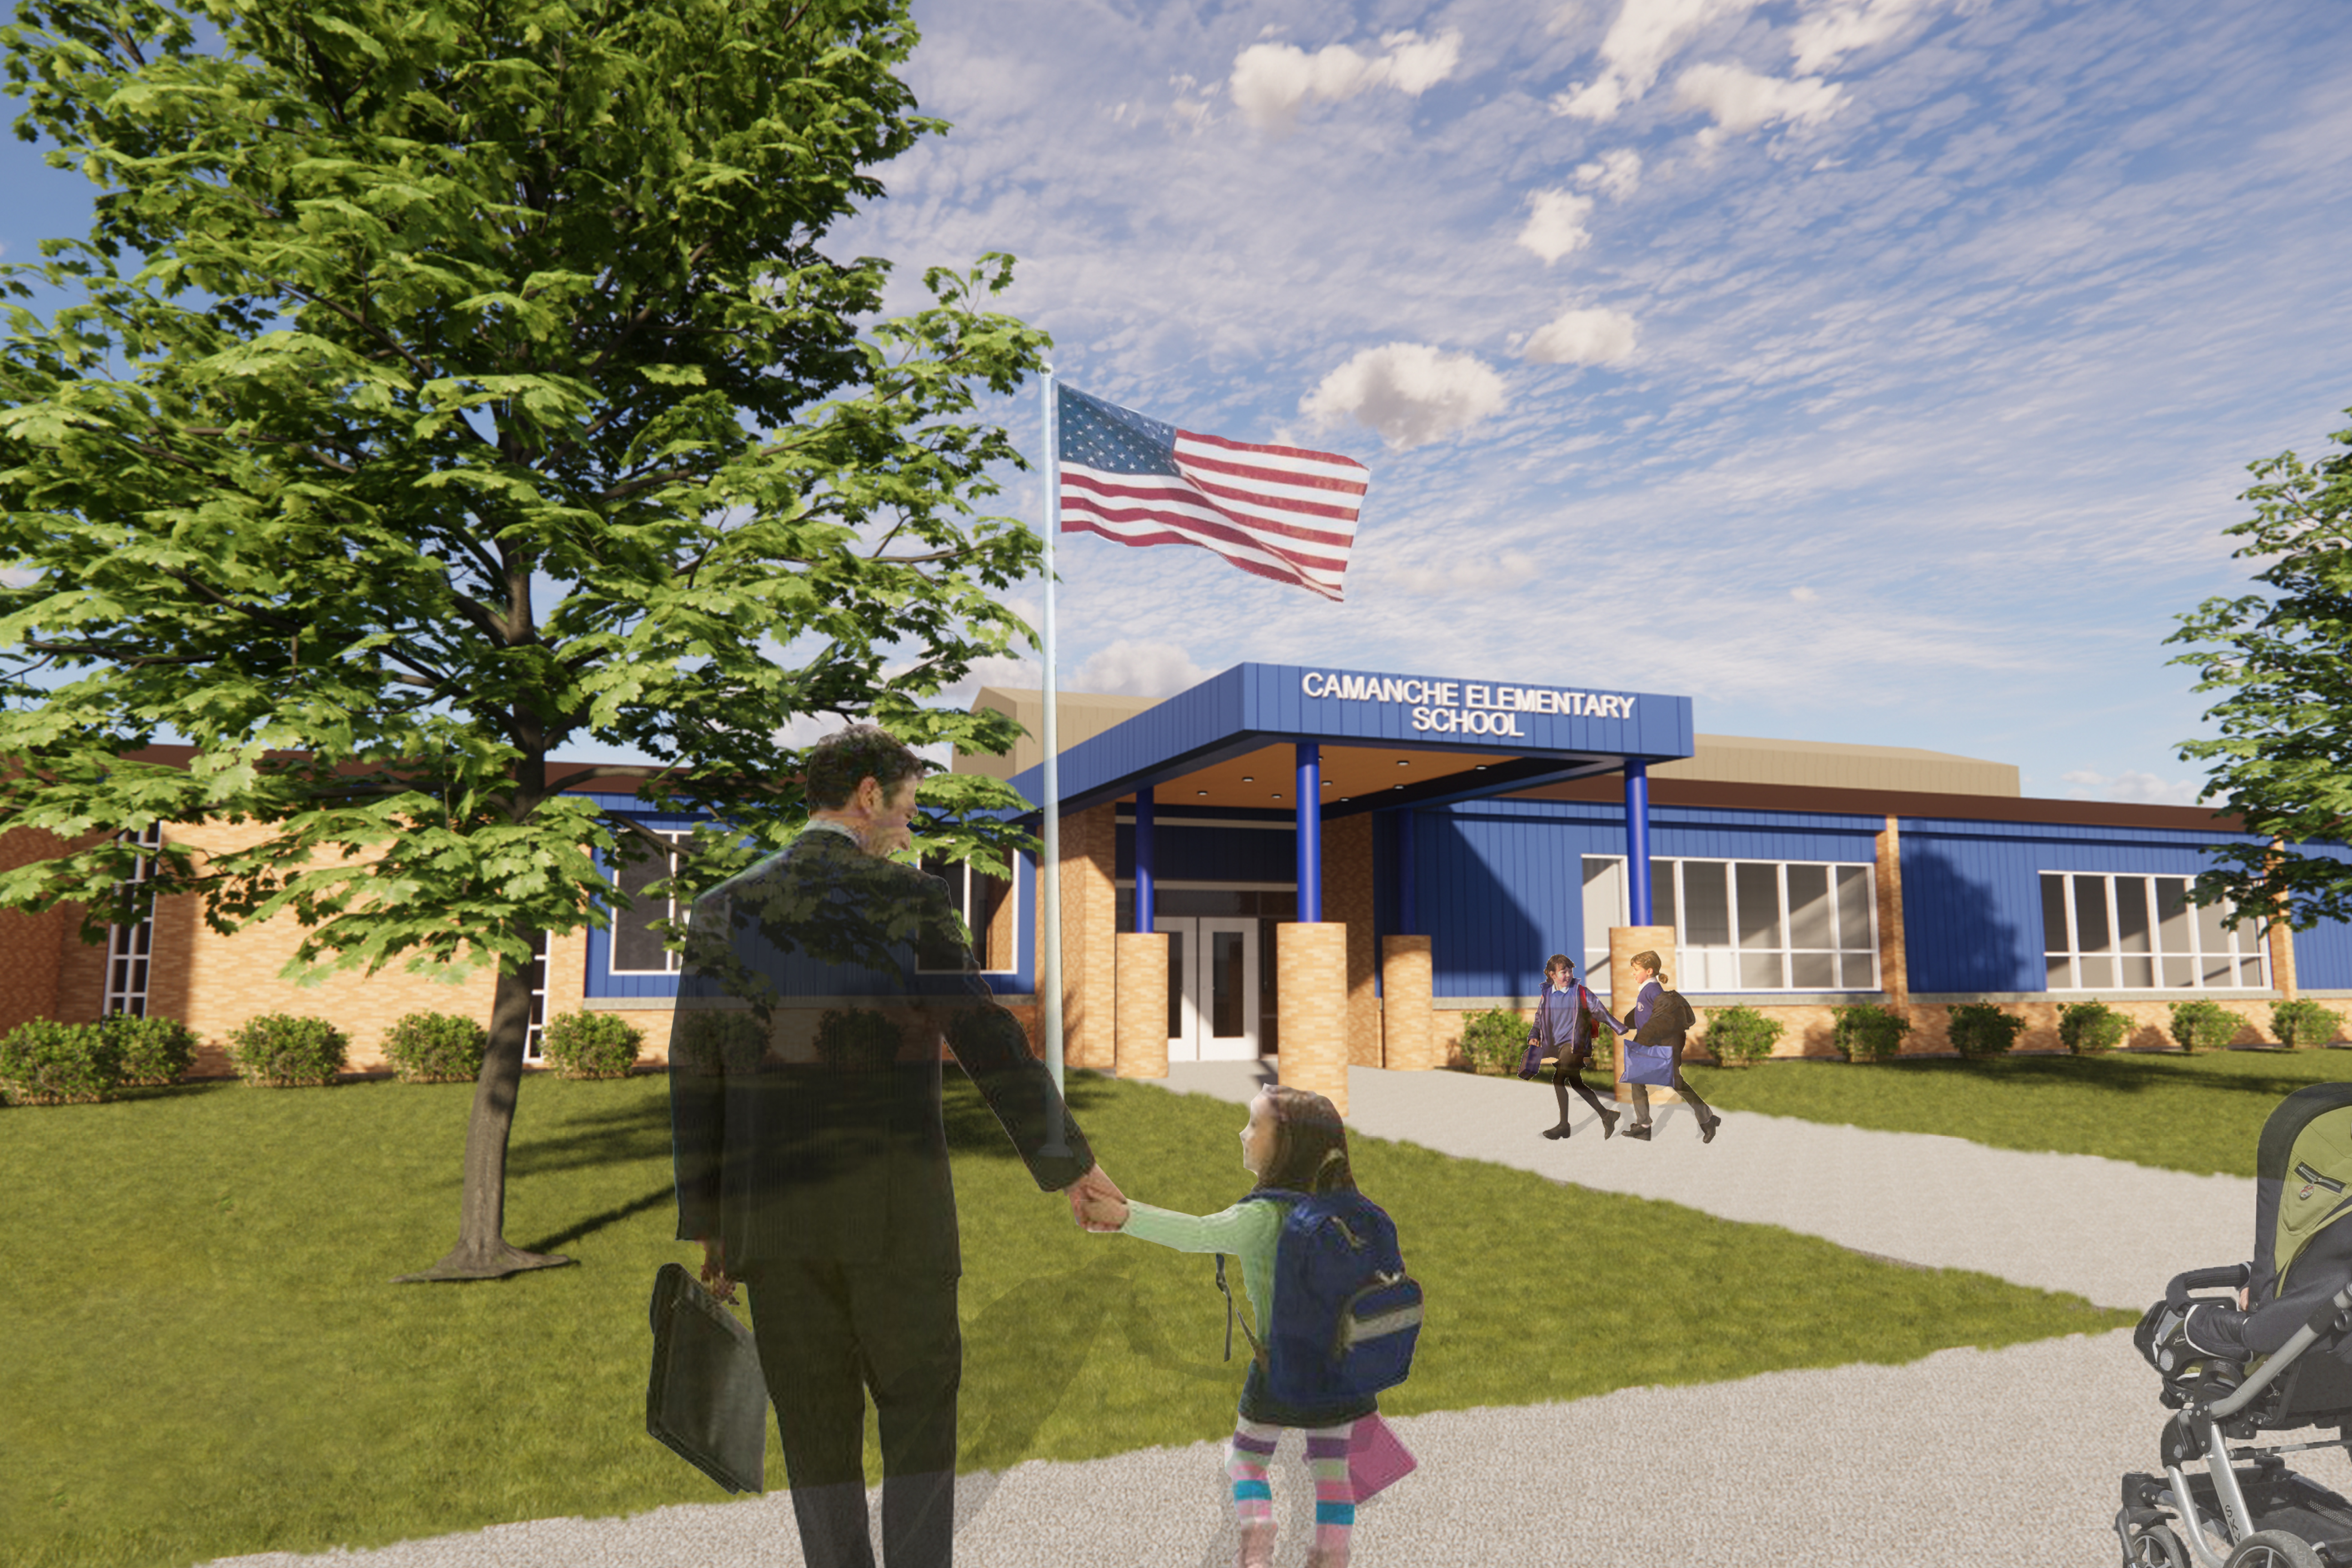 Camanche Elementary School Entrance Designed by Bray Architects